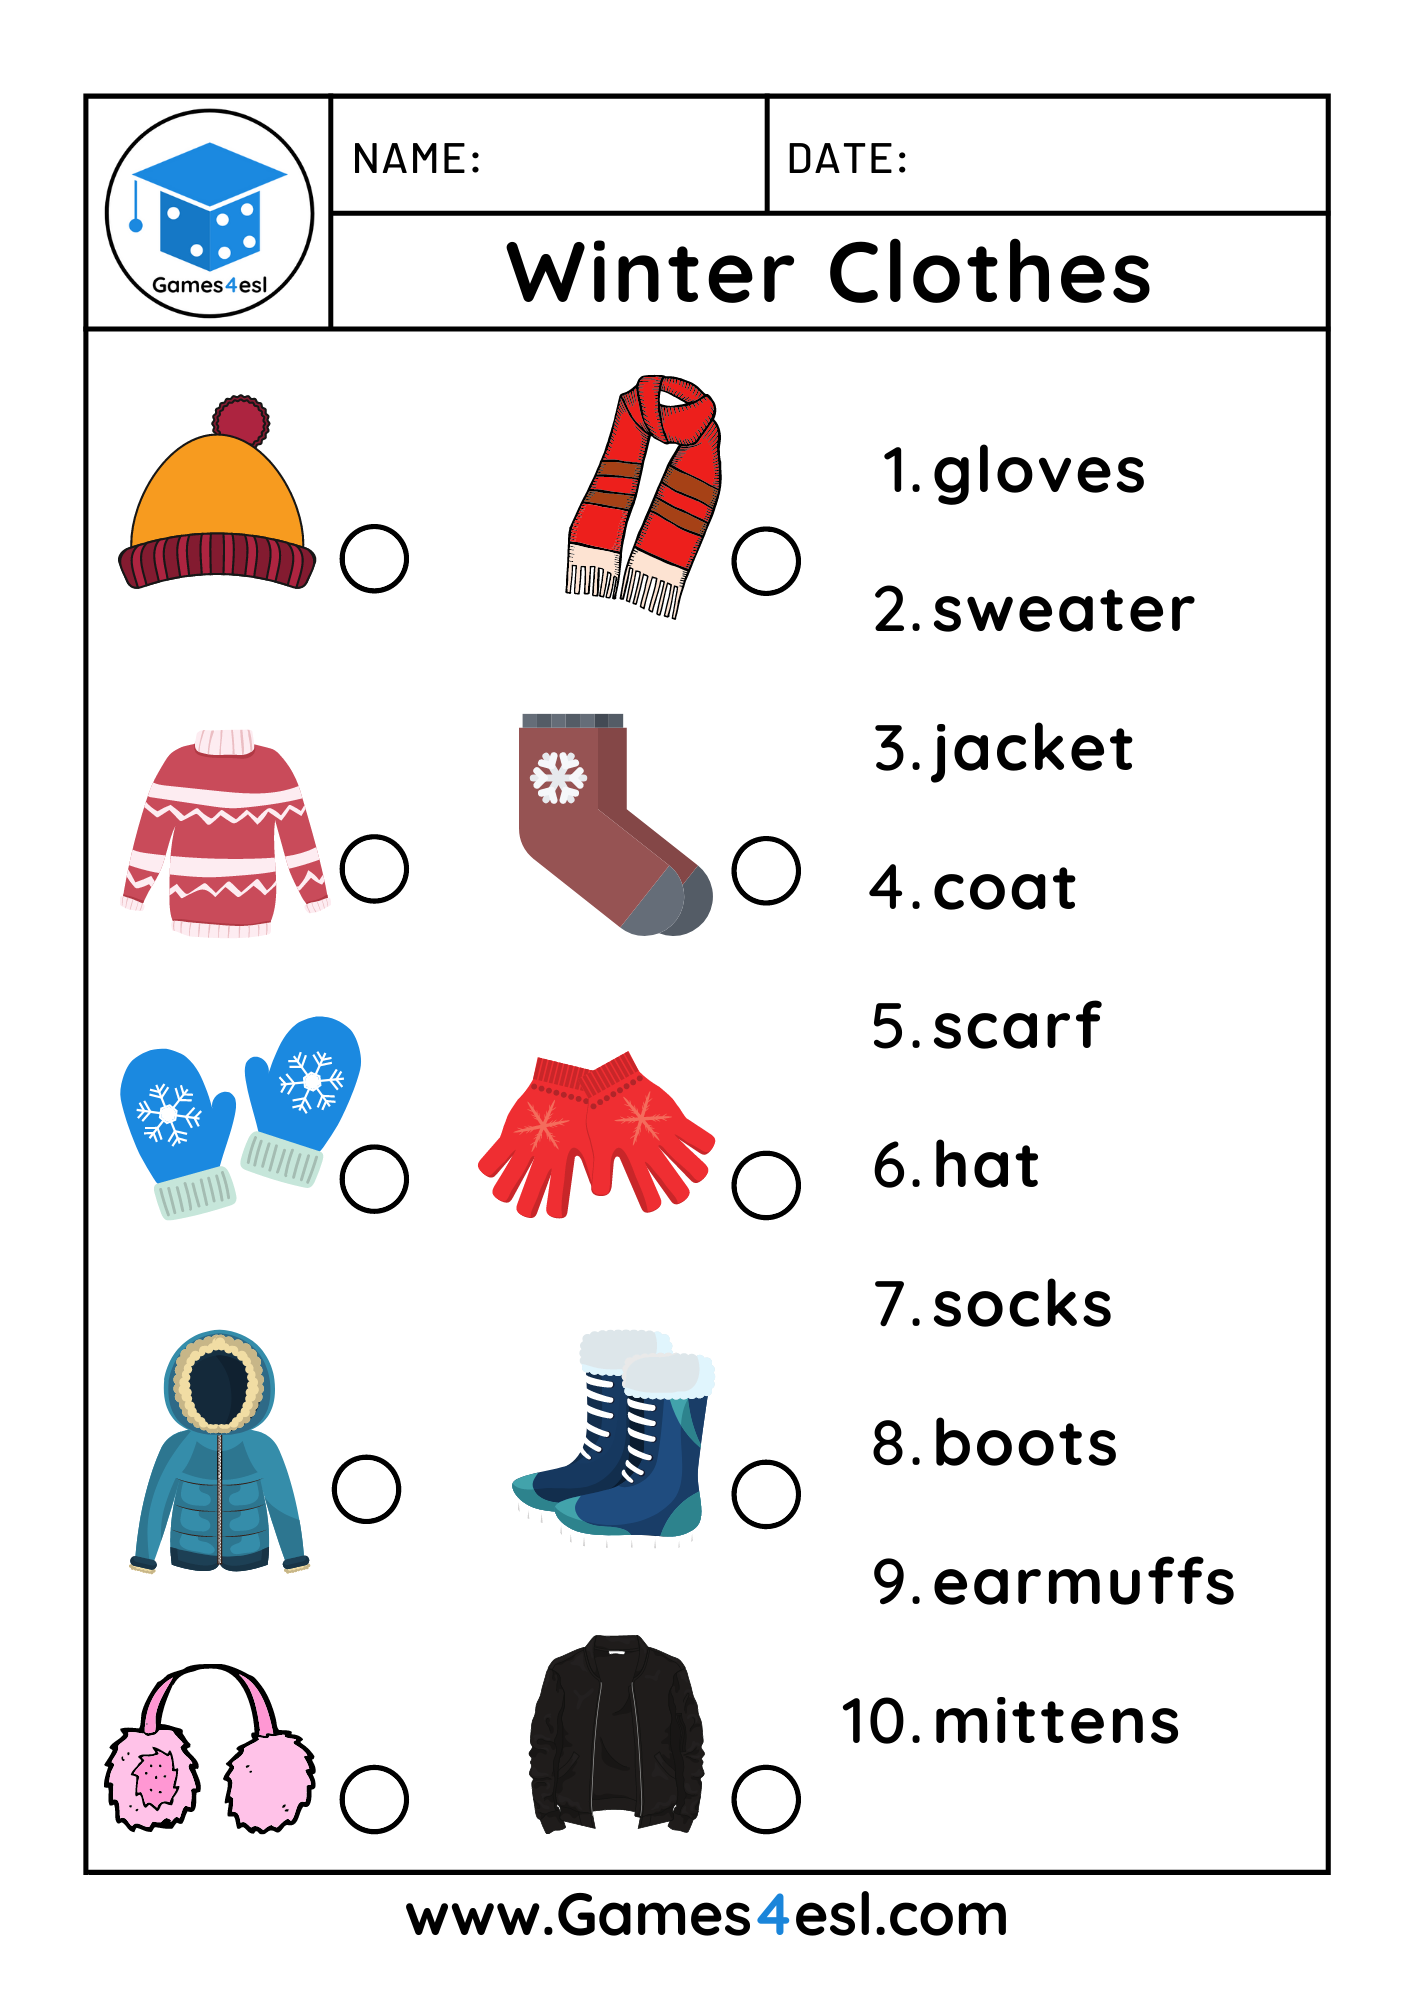 Clothes vocabulary - elementary - Games to learn English